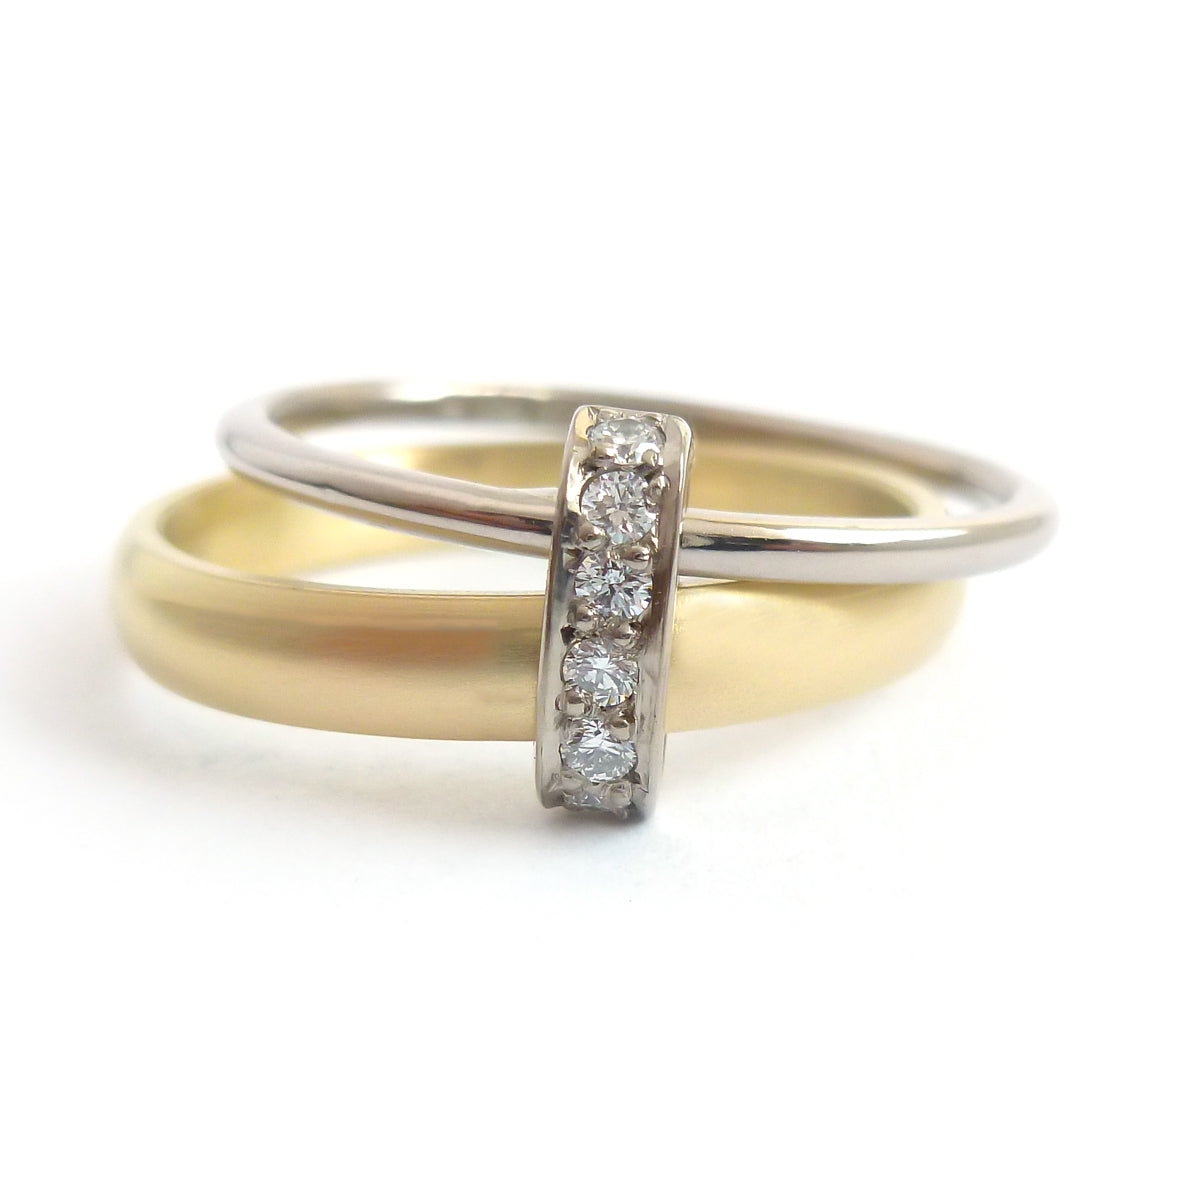 Contemporary, unique and modern two band wedding, bespoke engagement ring - Sue Lane.